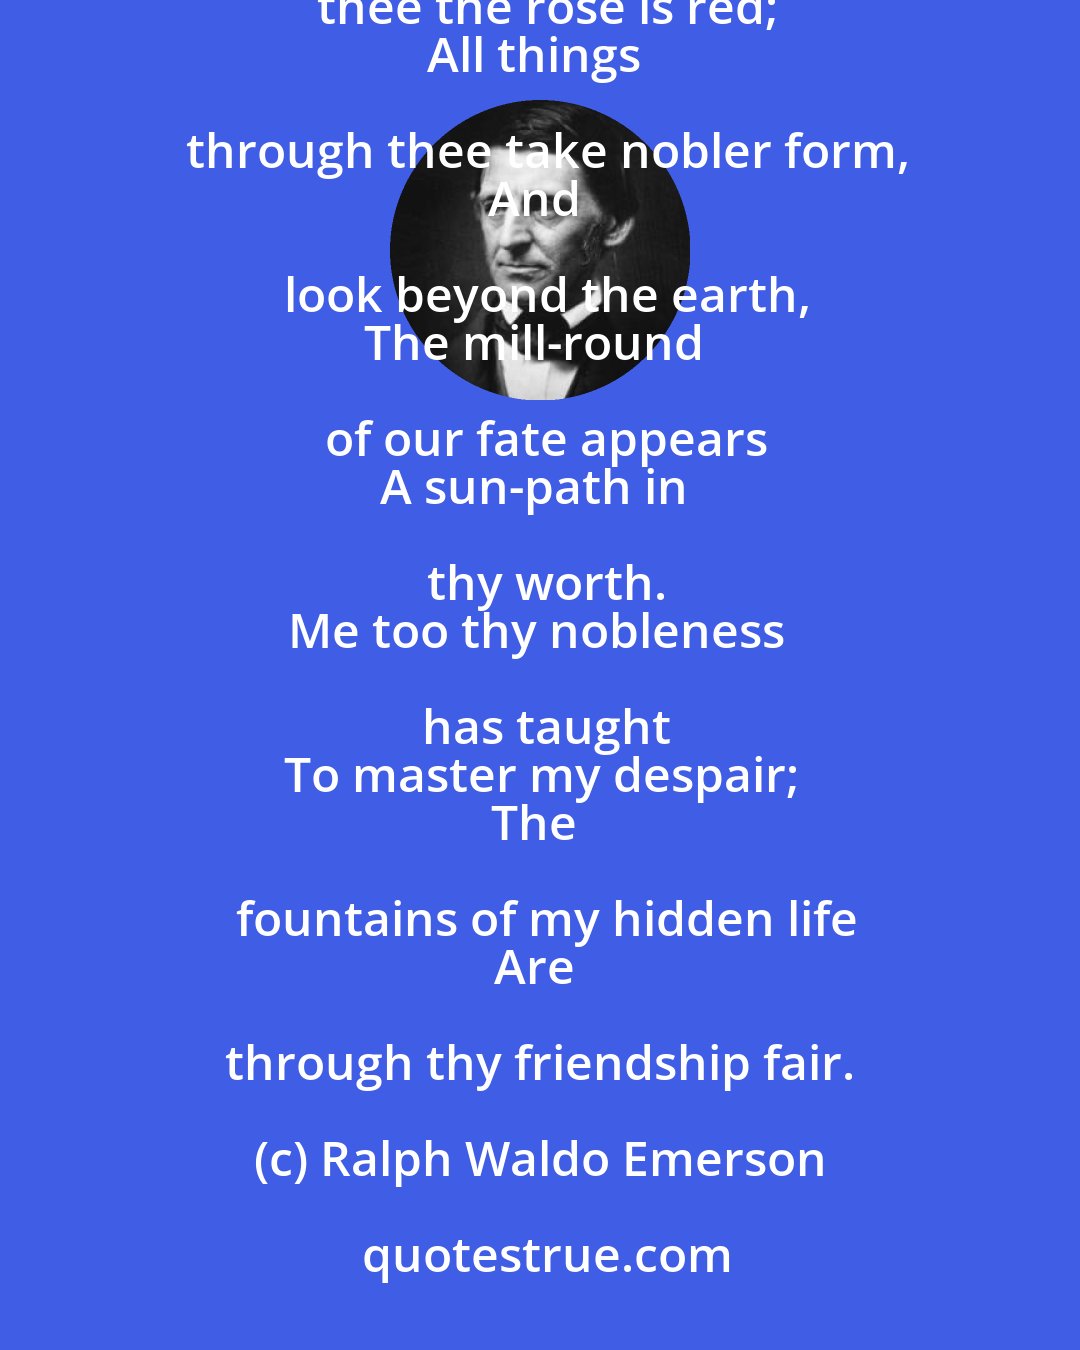 Ralph Waldo Emerson: O friend, my bosom said,
Through thee alone the sky is arched.
Through thee the rose is red;
All things through thee take nobler form,
And look beyond the earth,
The mill-round of our fate appears
A sun-path in thy worth.
Me too thy nobleness has taught
To master my despair;
The fountains of my hidden life
Are through thy friendship fair.